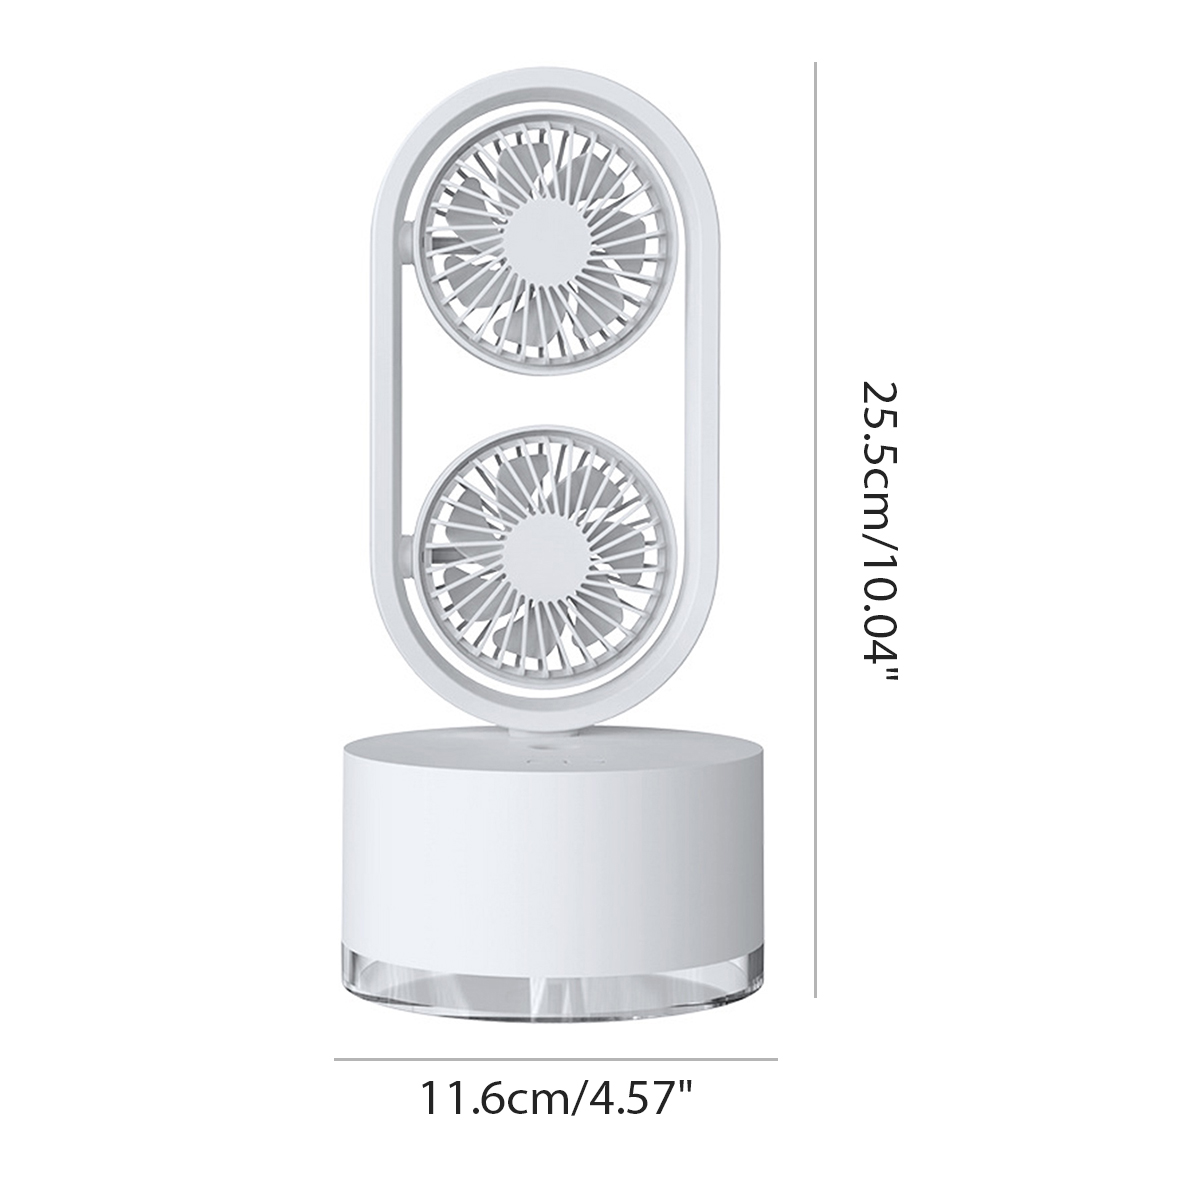 Mini-Dual-Head-Fan-3-Speeds-USB-Rechargeable-Air-Condition-Fan-400ml-Water-Tank-Spray-Humidification-1846006-12